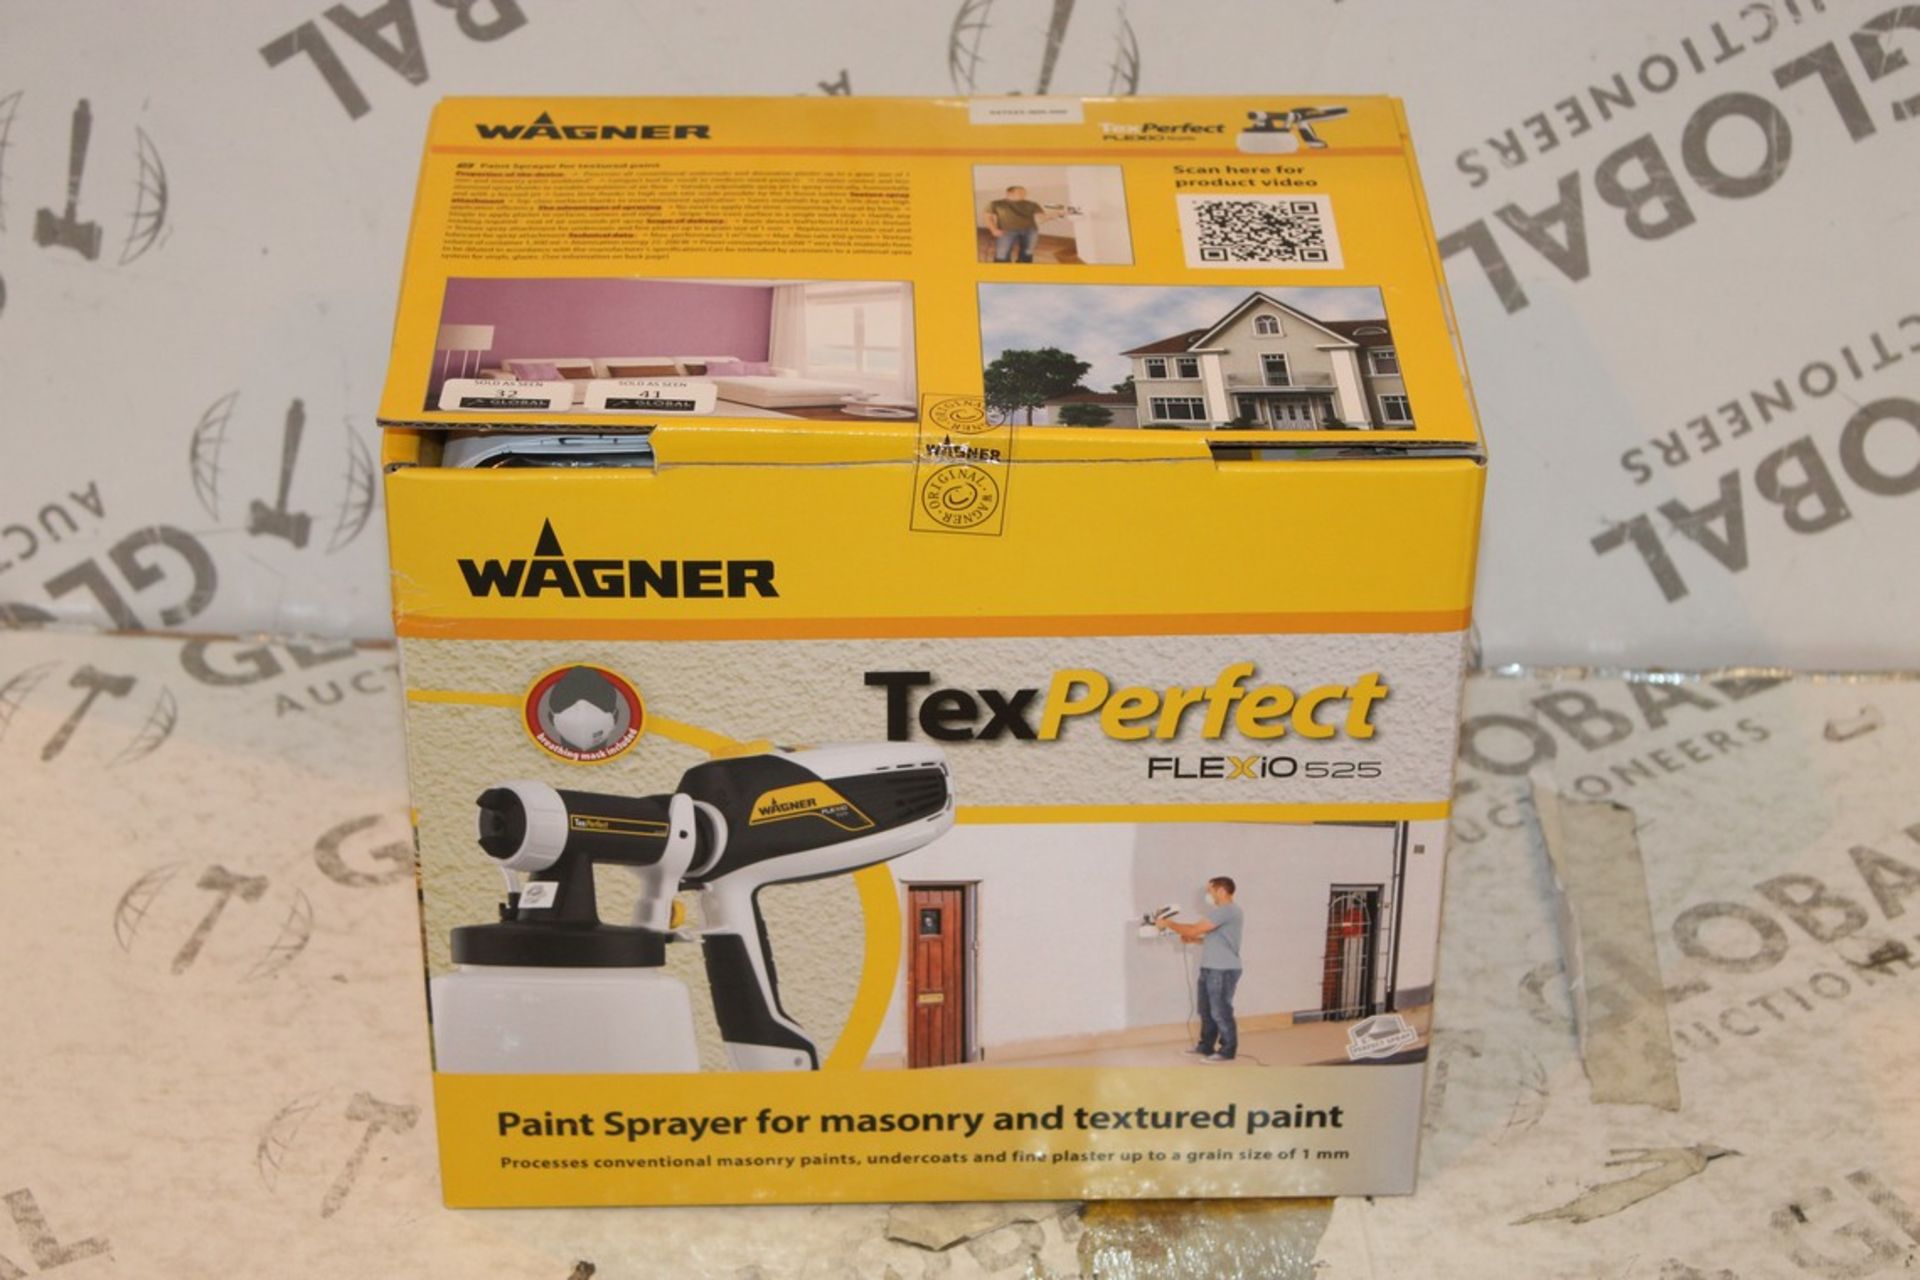 Boxed Brand New Wagner Texperfect Flexio 525 Masonry And Textured Paint Sprayer RRP £75 (Public